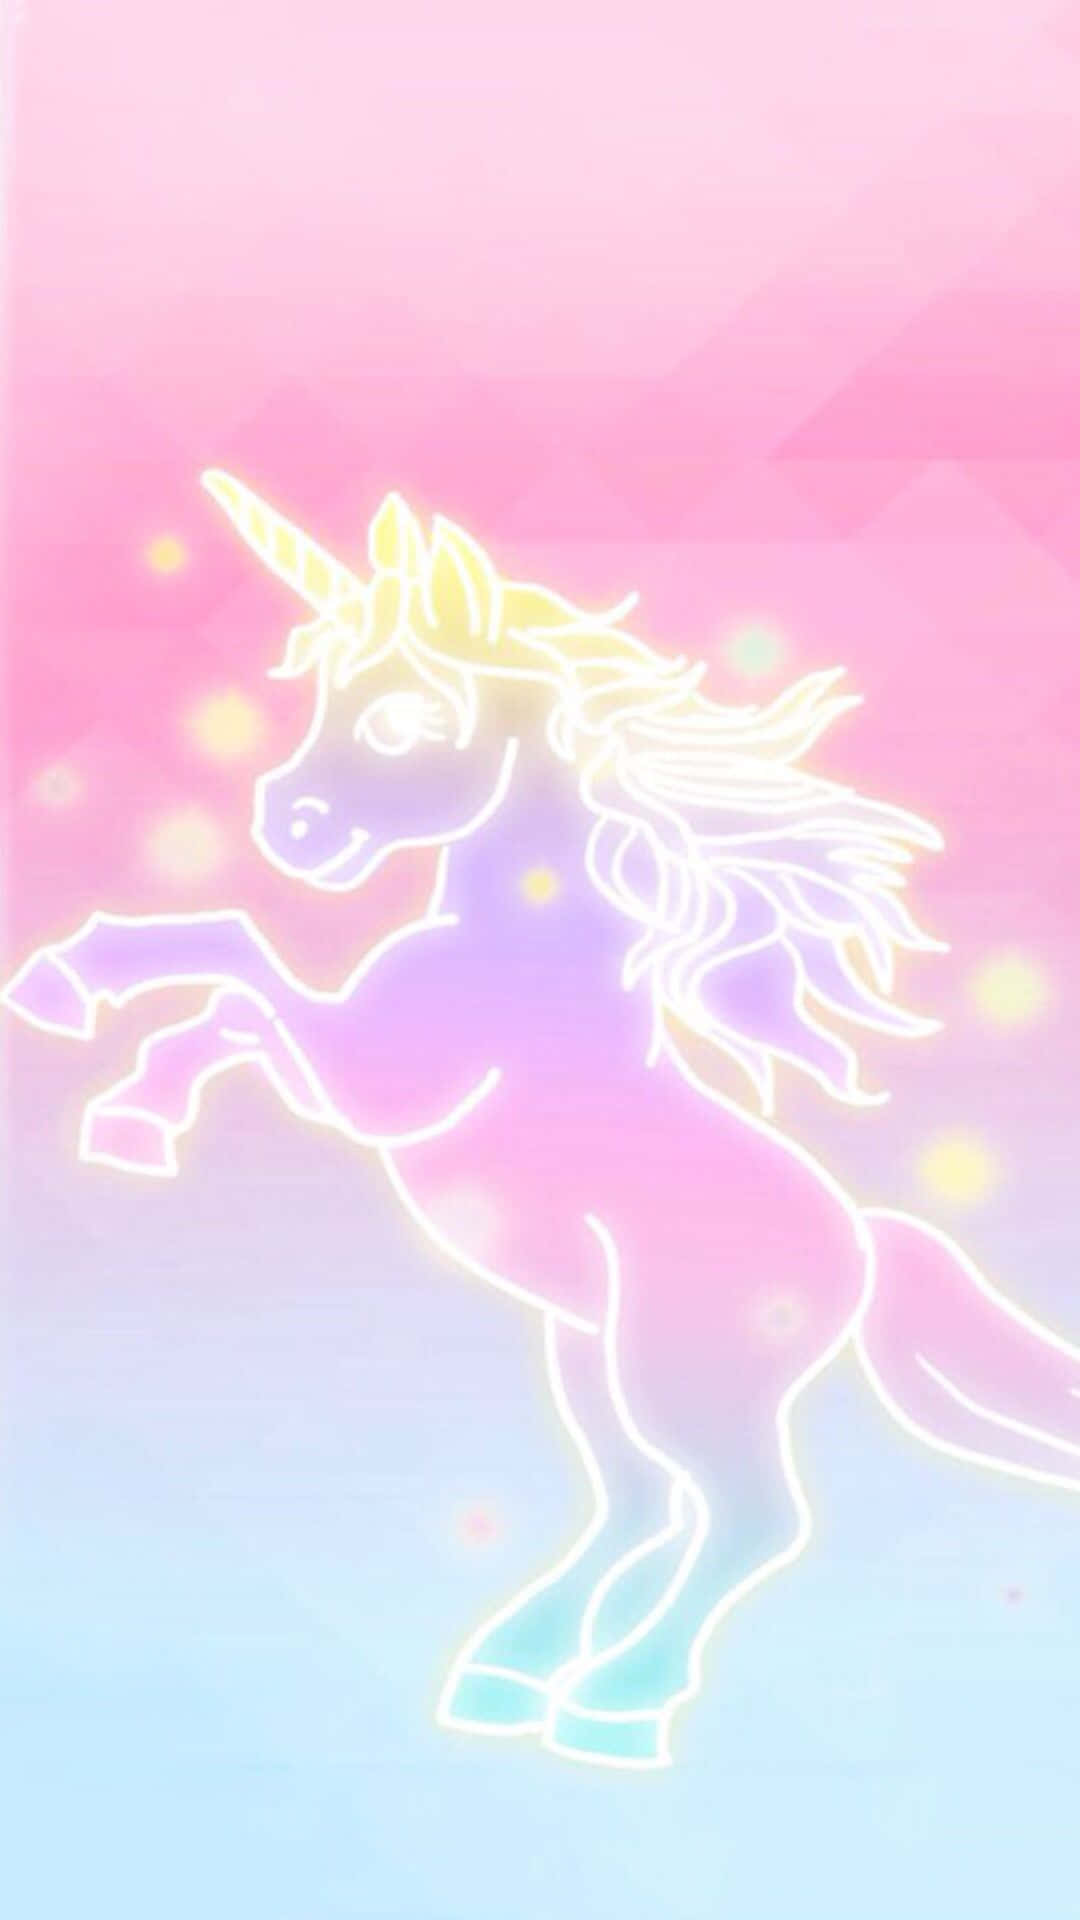 "A Timelessly Magical Pastel Unicorn"